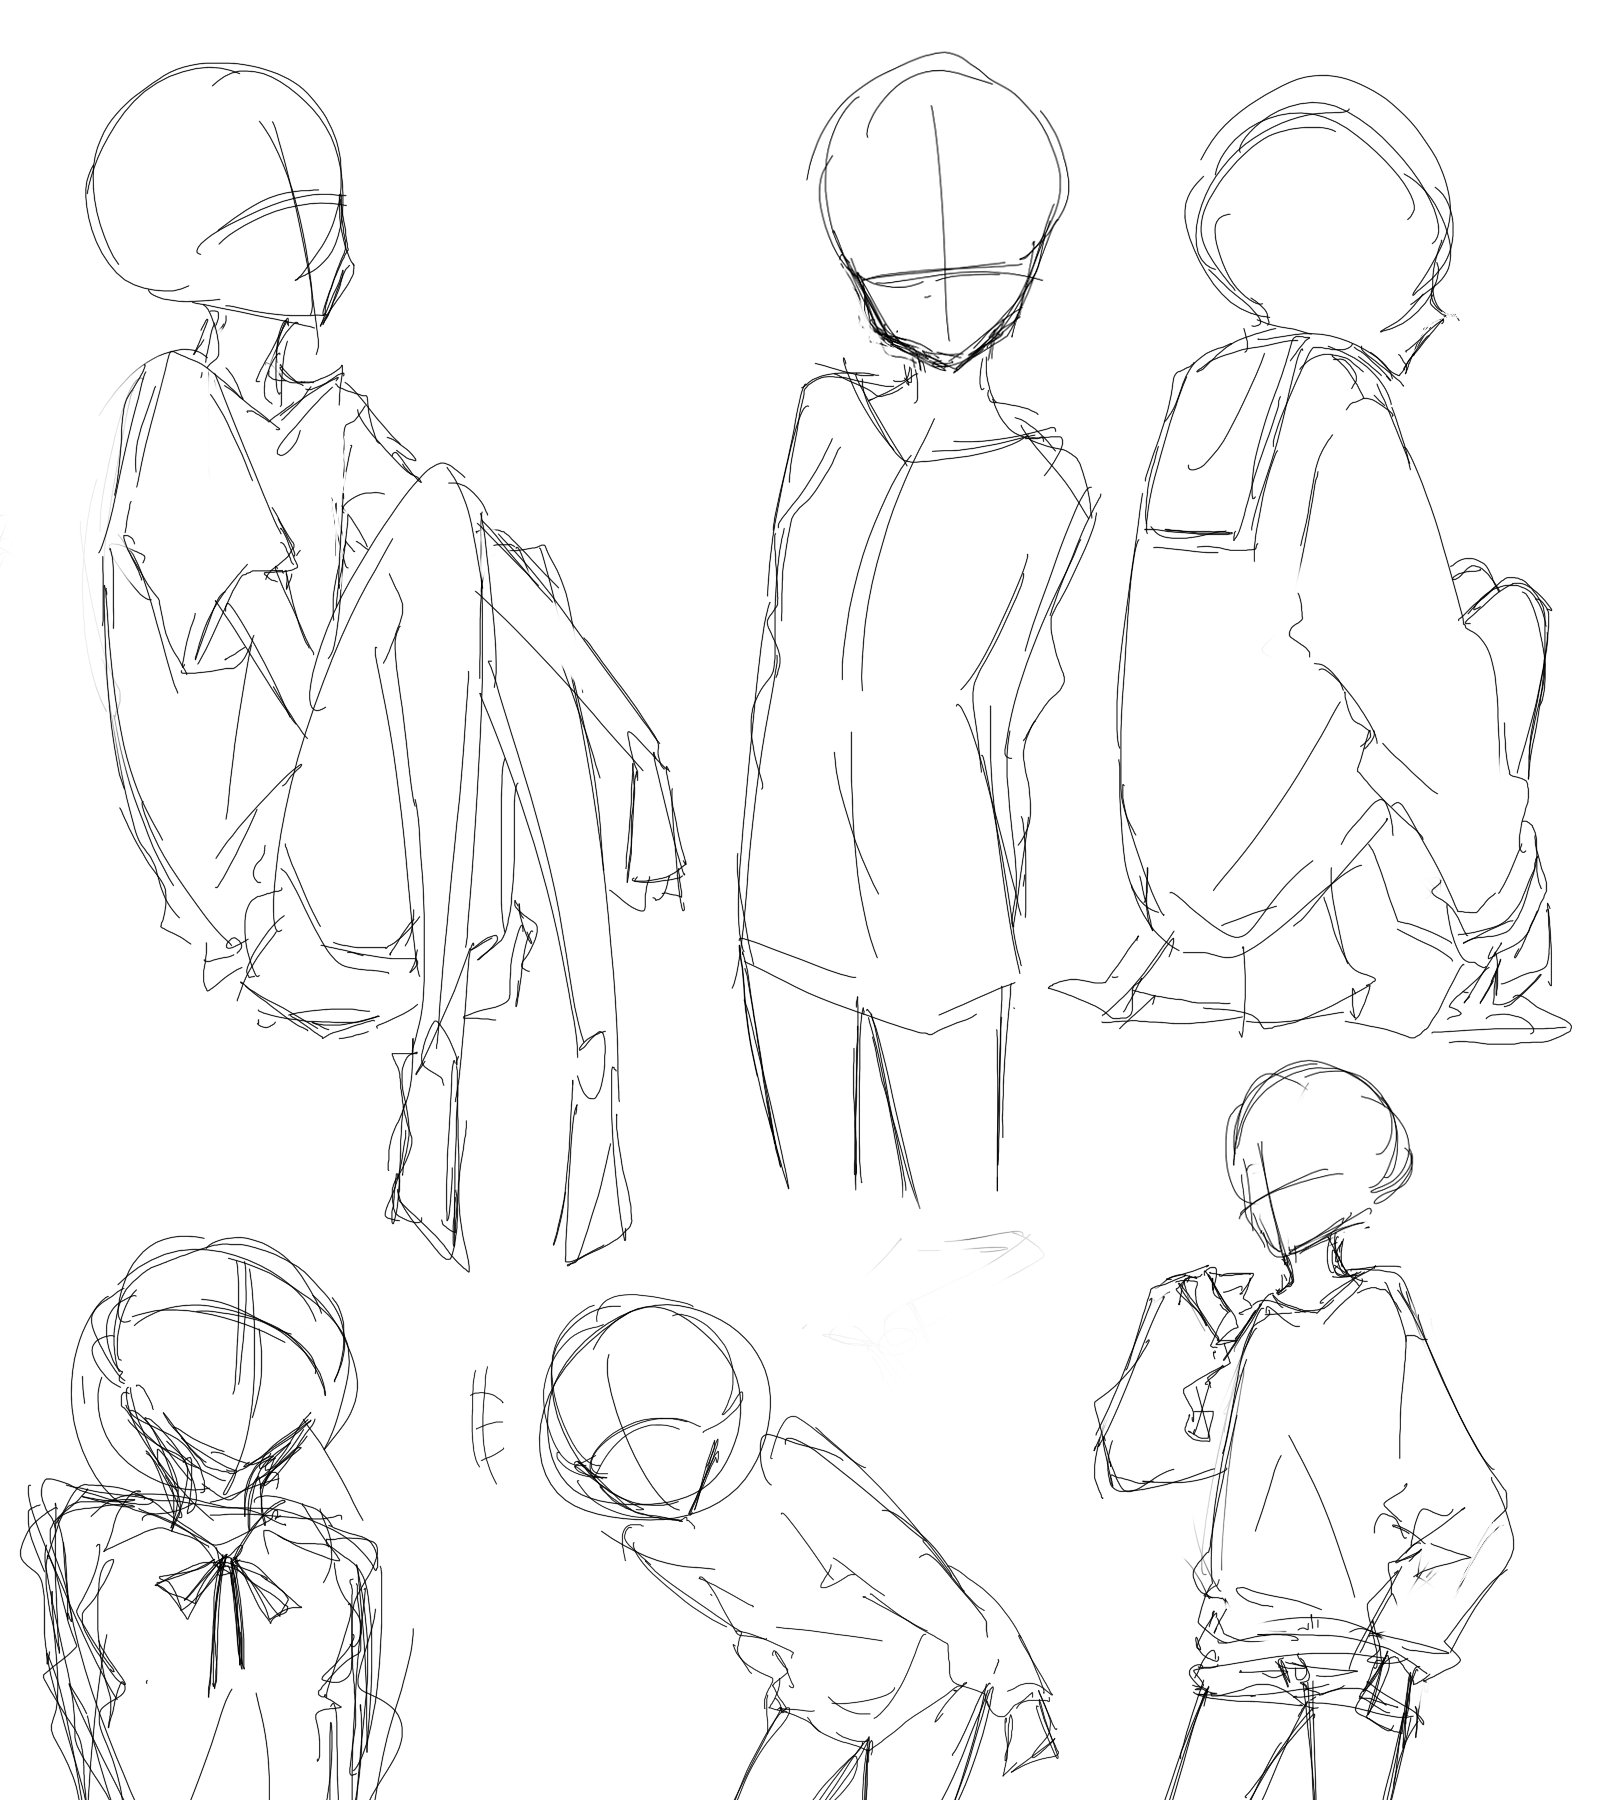 Female poses study by itsabrams on DeviantArt